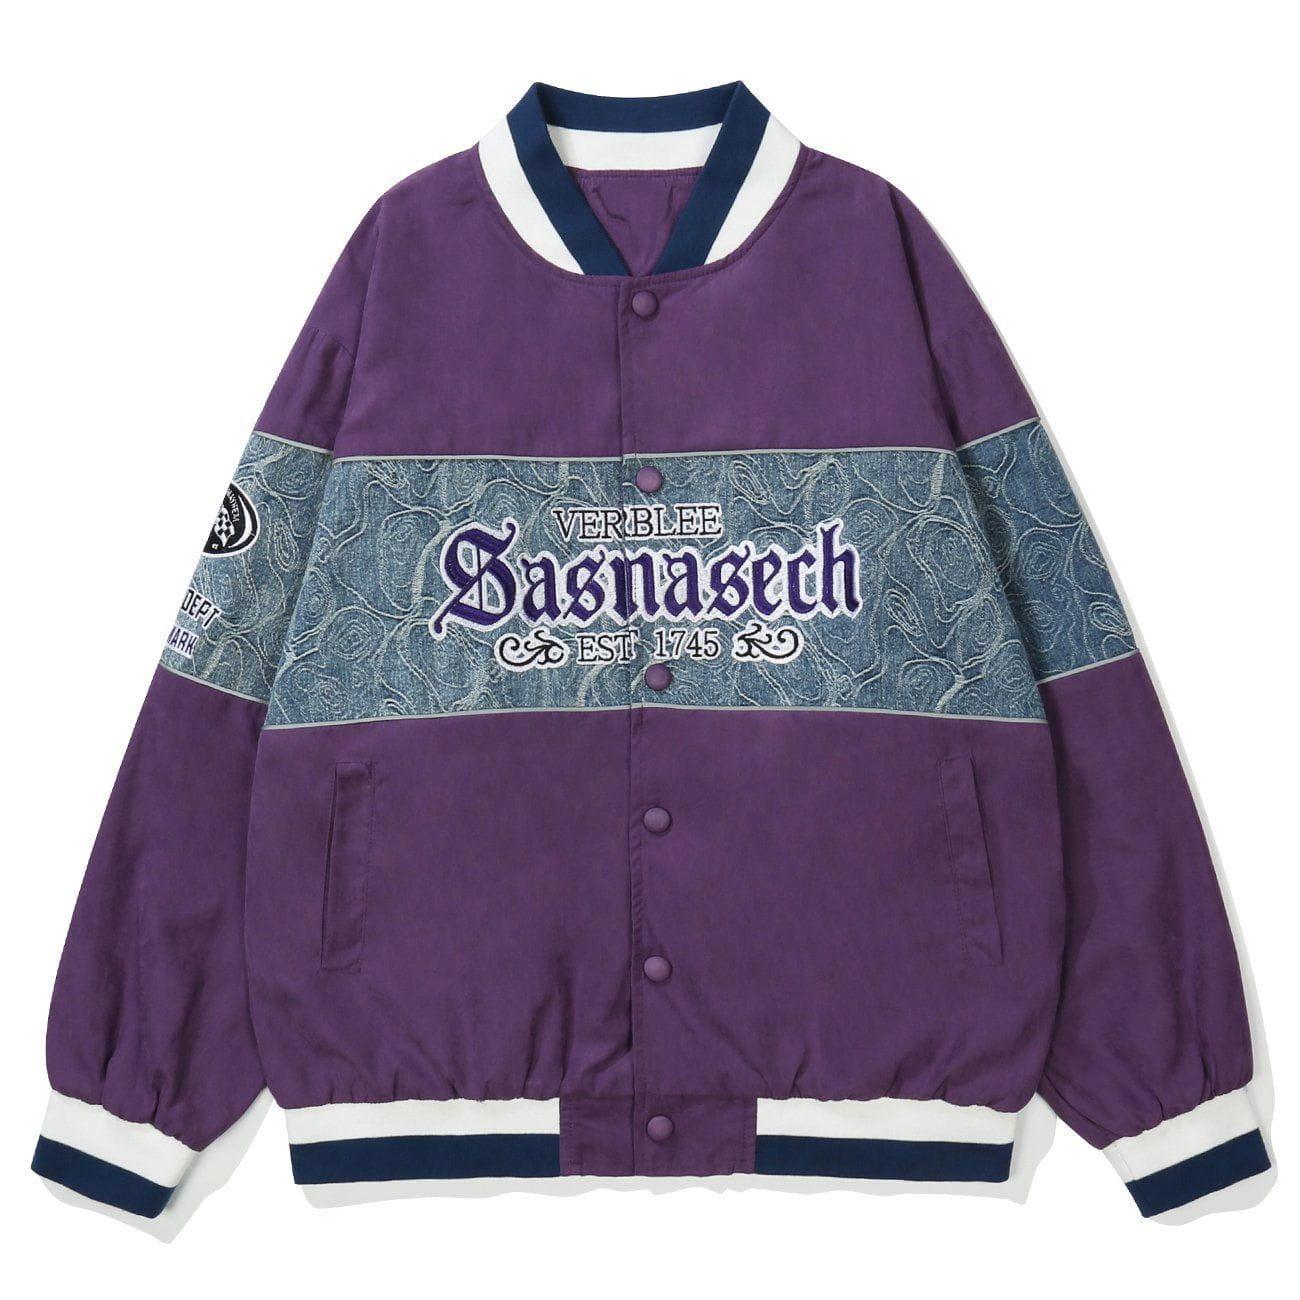 Majesda® - Embroidered Letter Patchwork Jacket outfit ideas, streetwear fashion - majesda.com